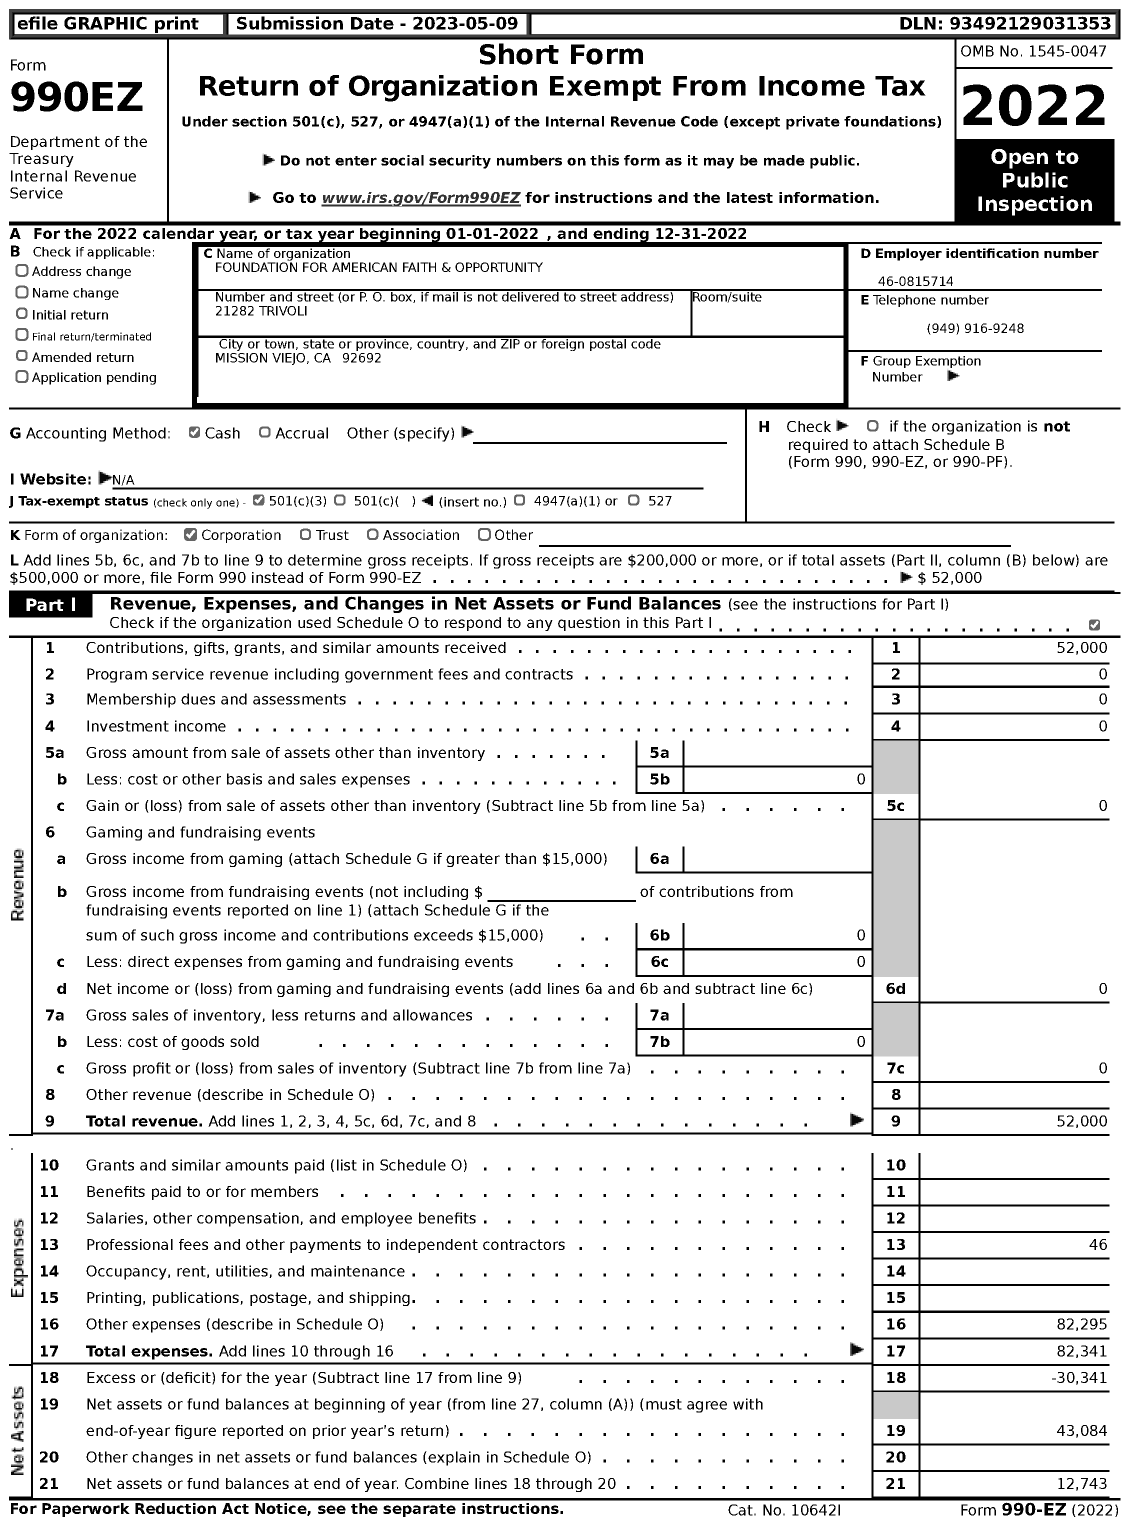 Image of first page of 2022 Form 990EZ for Foundation for American Faith and Opportunity